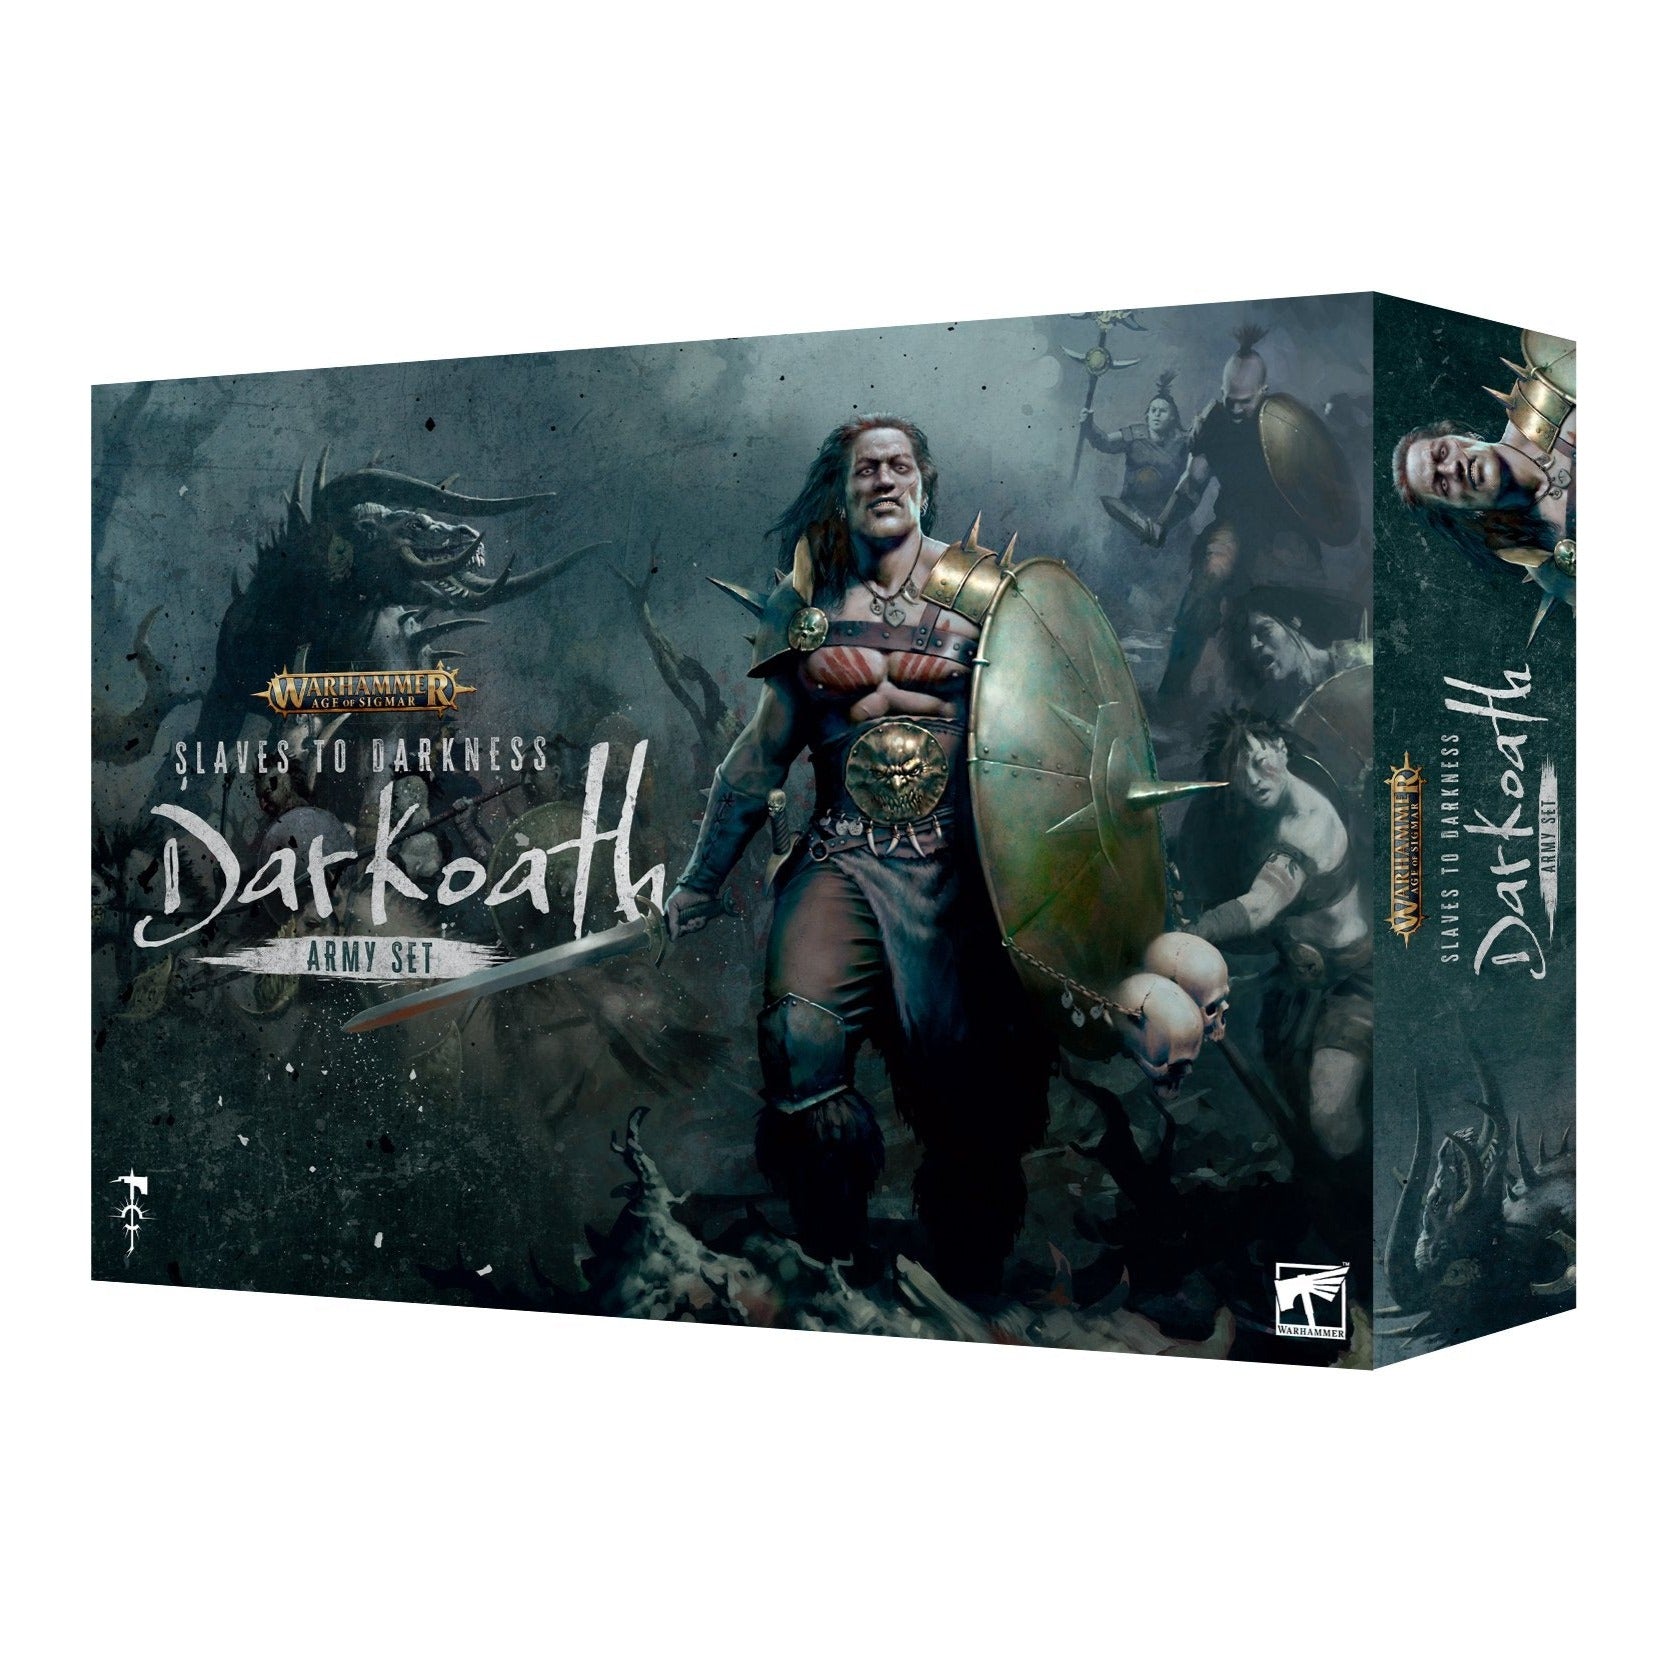 Slaves to Darkness Darkoath Army Set - Release Date 4/5/24 - Loaded Dice